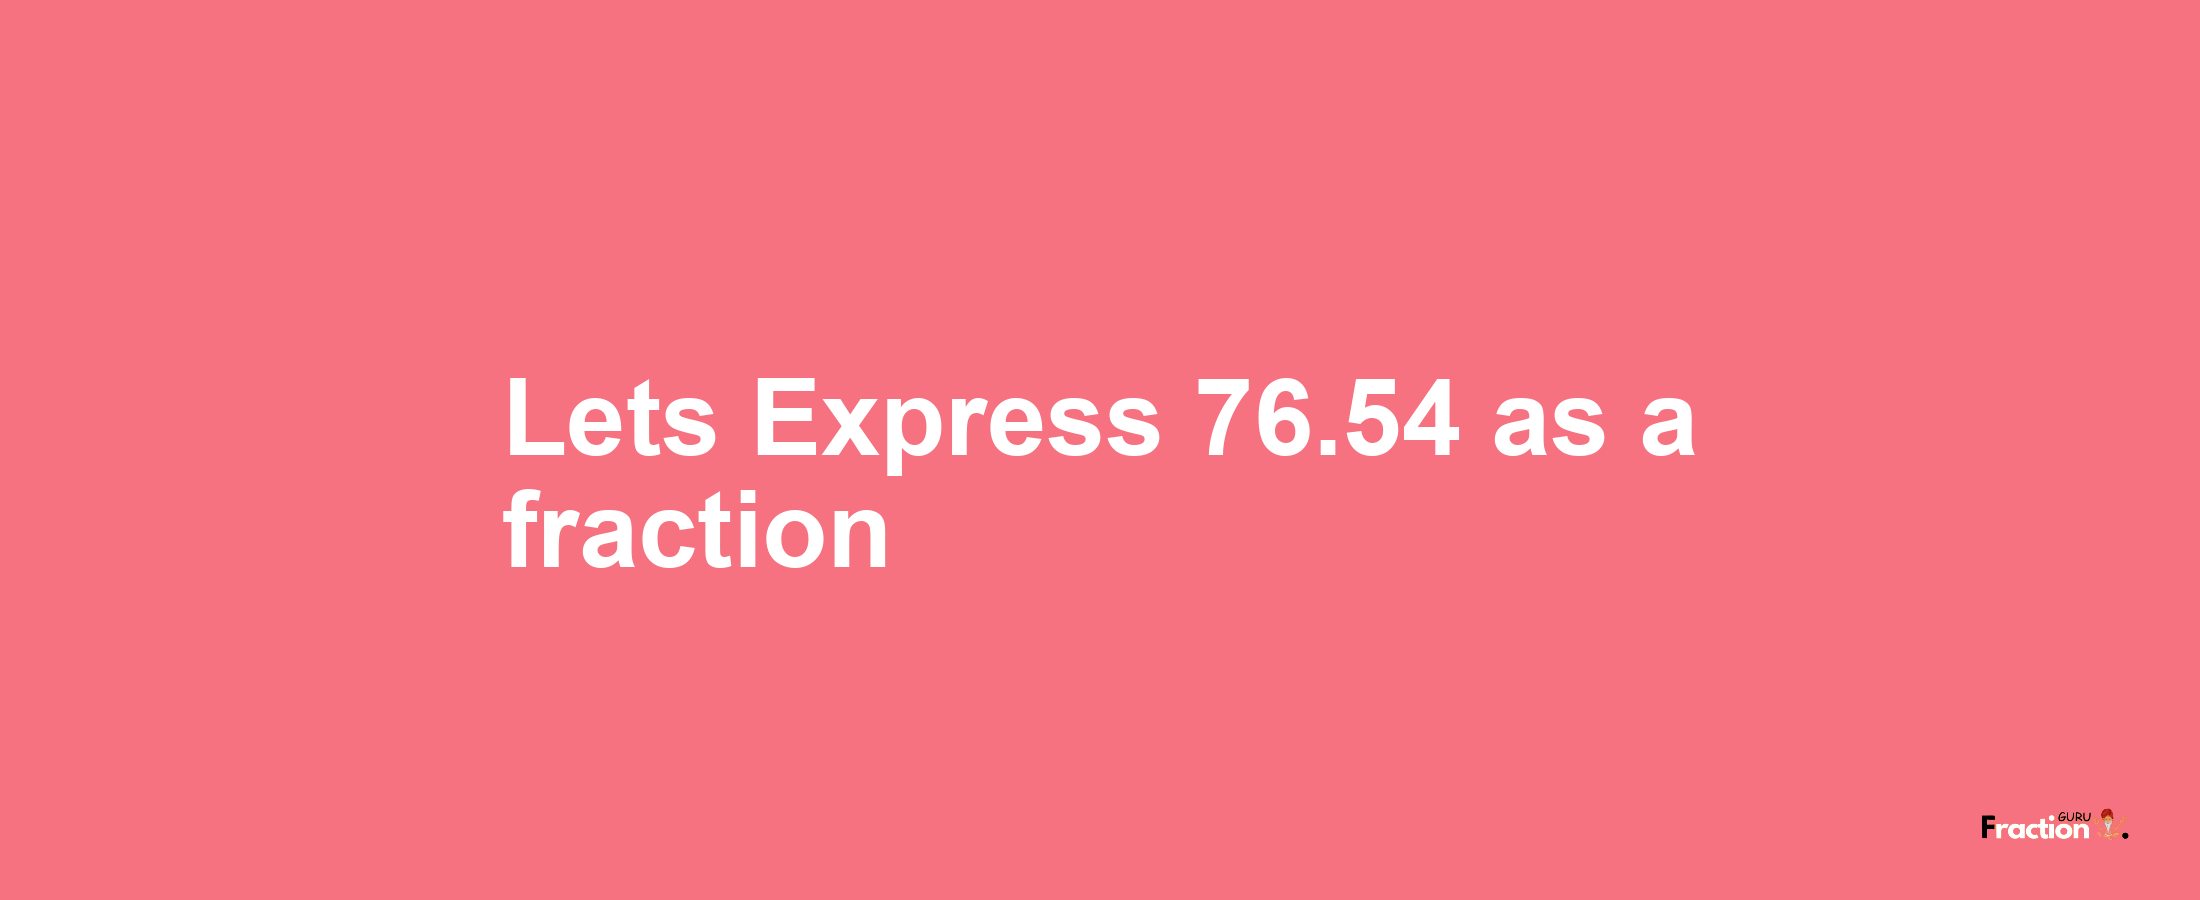 Lets Express 76.54 as afraction